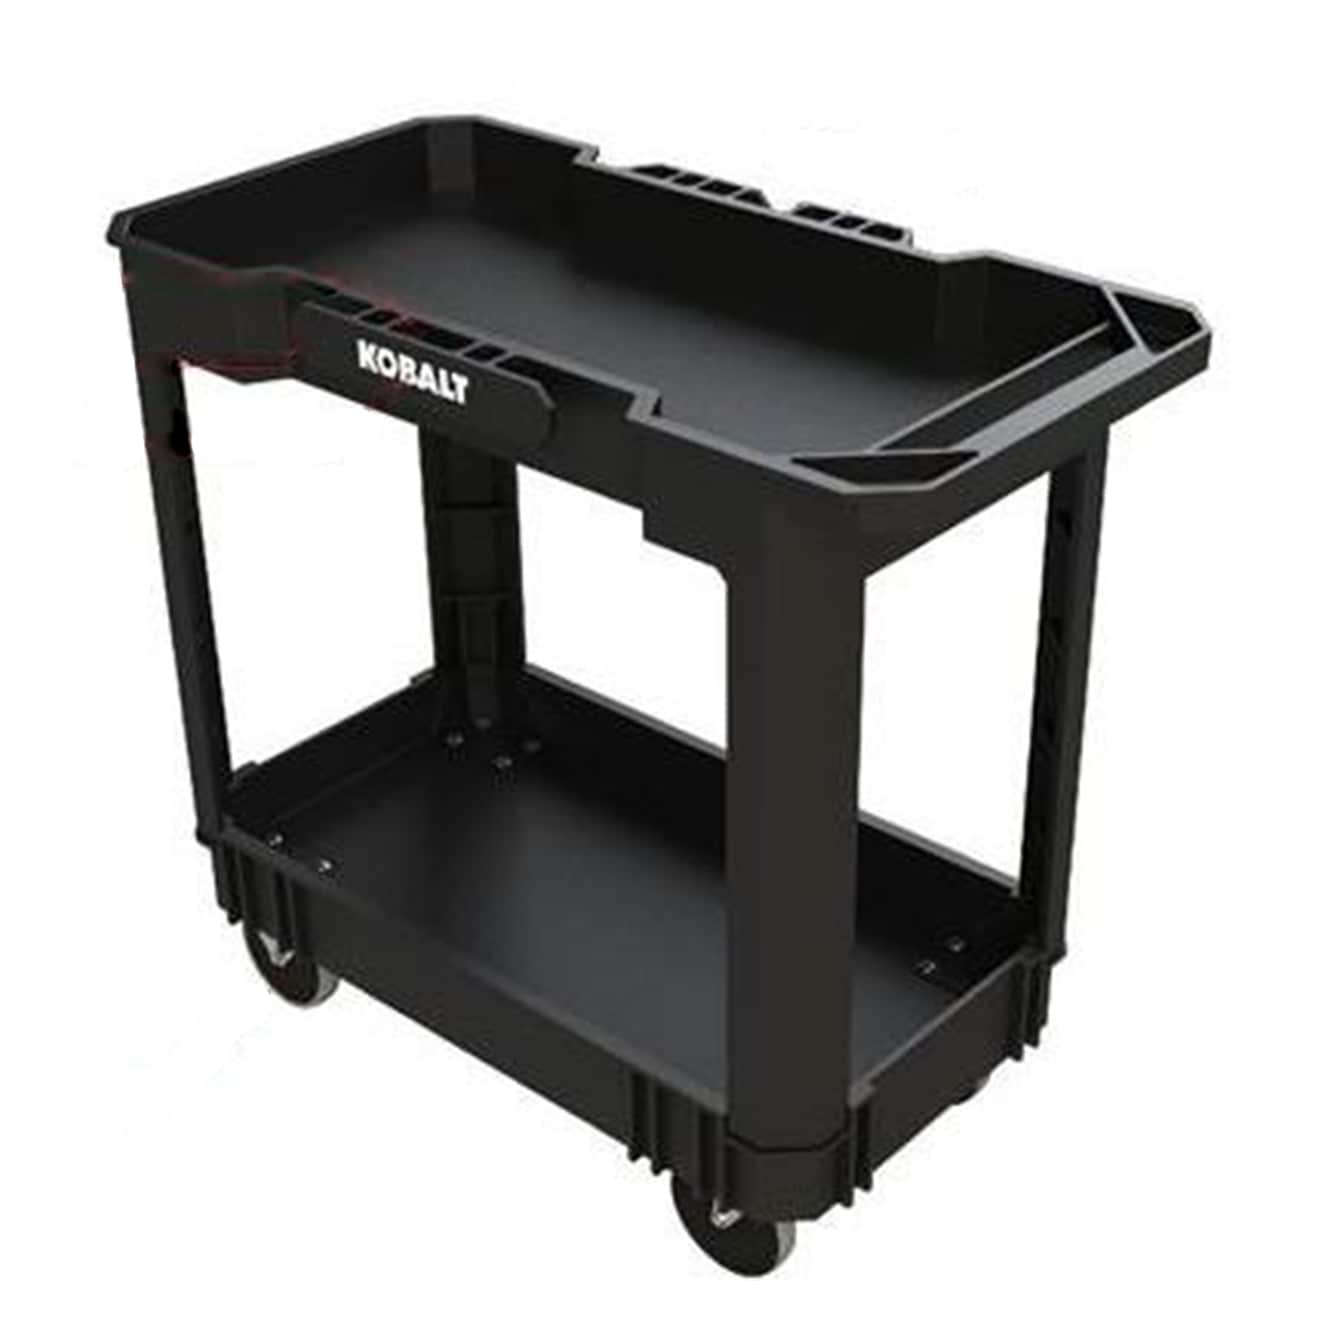 41 x 17 x 34 Cleaning Great for Warehouse Goplus 2-Shelf Utility Cart/Service Cart with Wheels Garage 550 LBS Capacity Heavy Duty Plastic Rolling Utility Cart Tub Carts w/Deep Shelves 